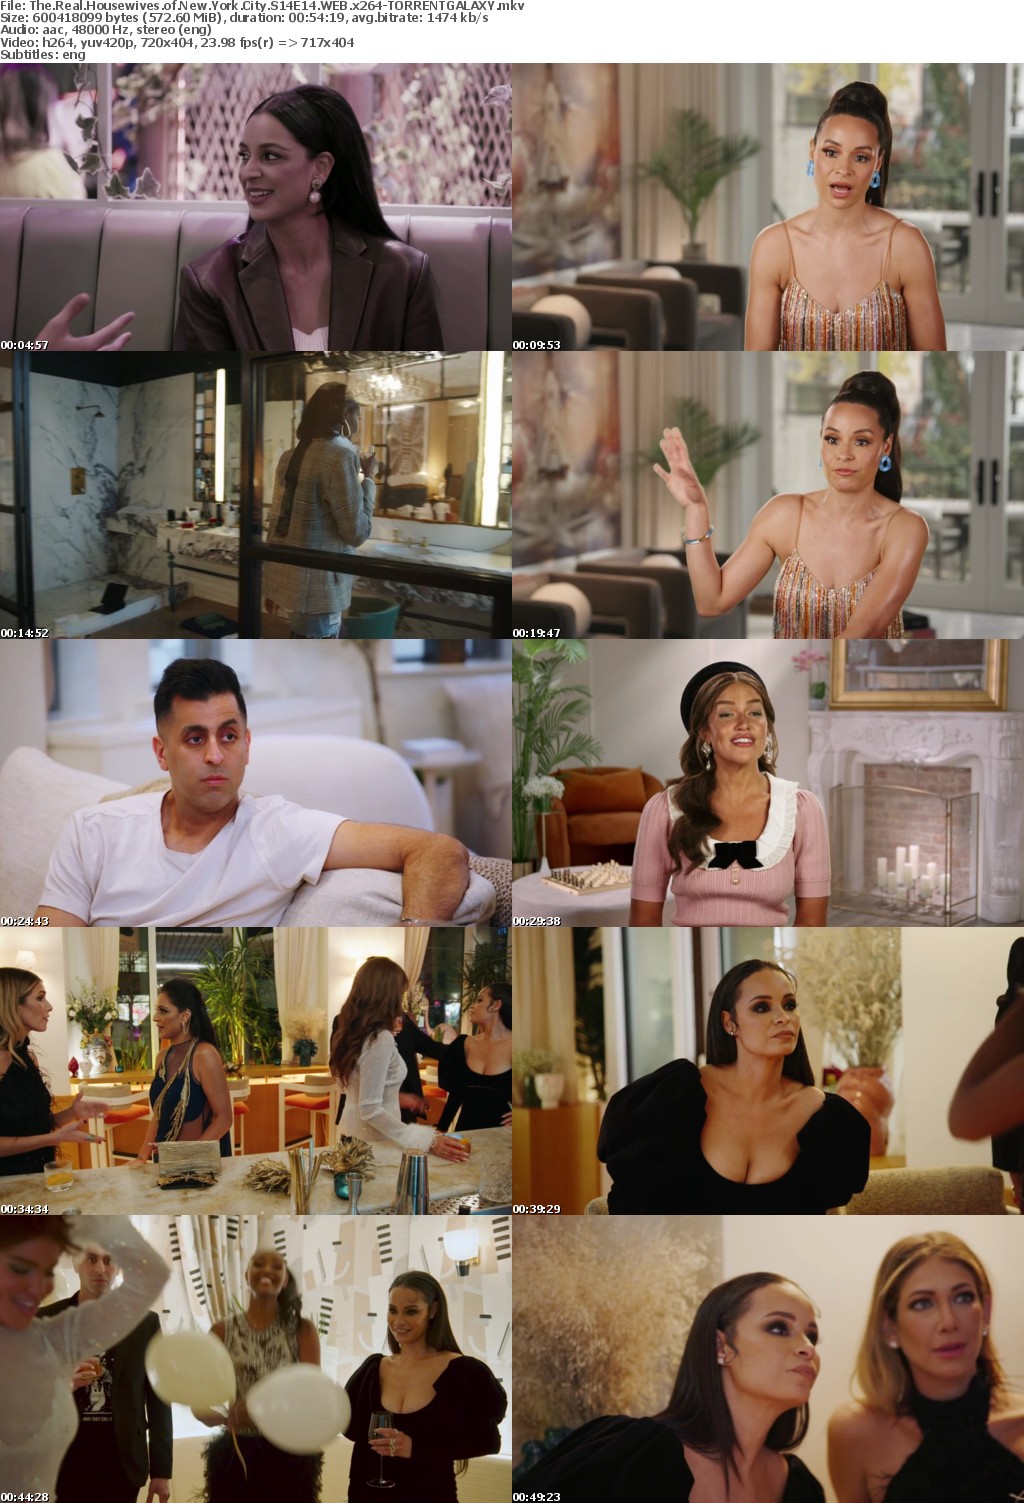 The Real Housewives of New York City S14E14 WEB x264-GALAXY